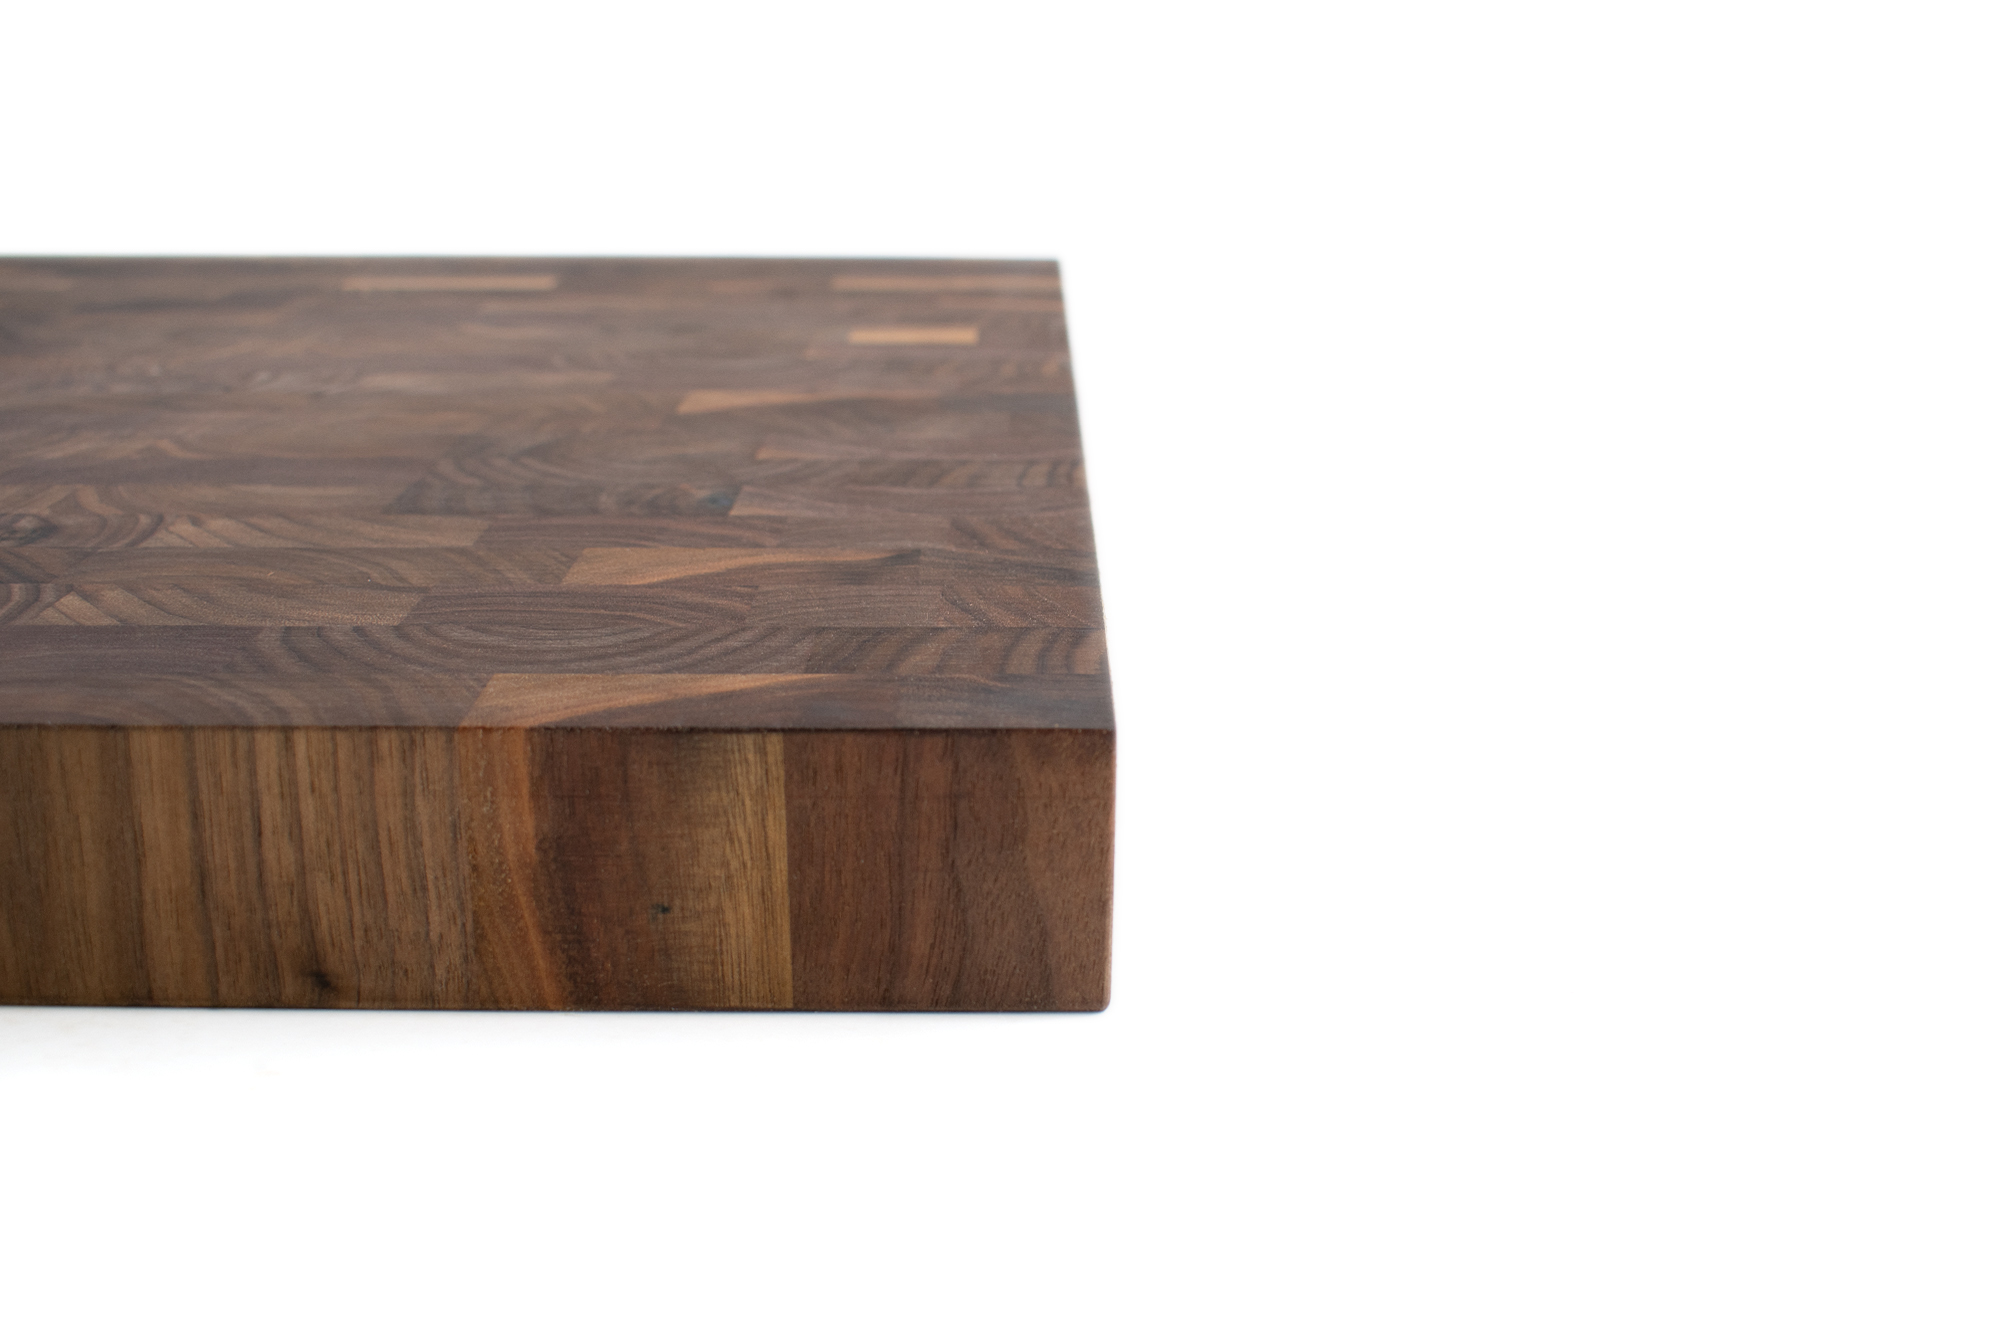 Large Walnut End grain butcher block with side handle indents 